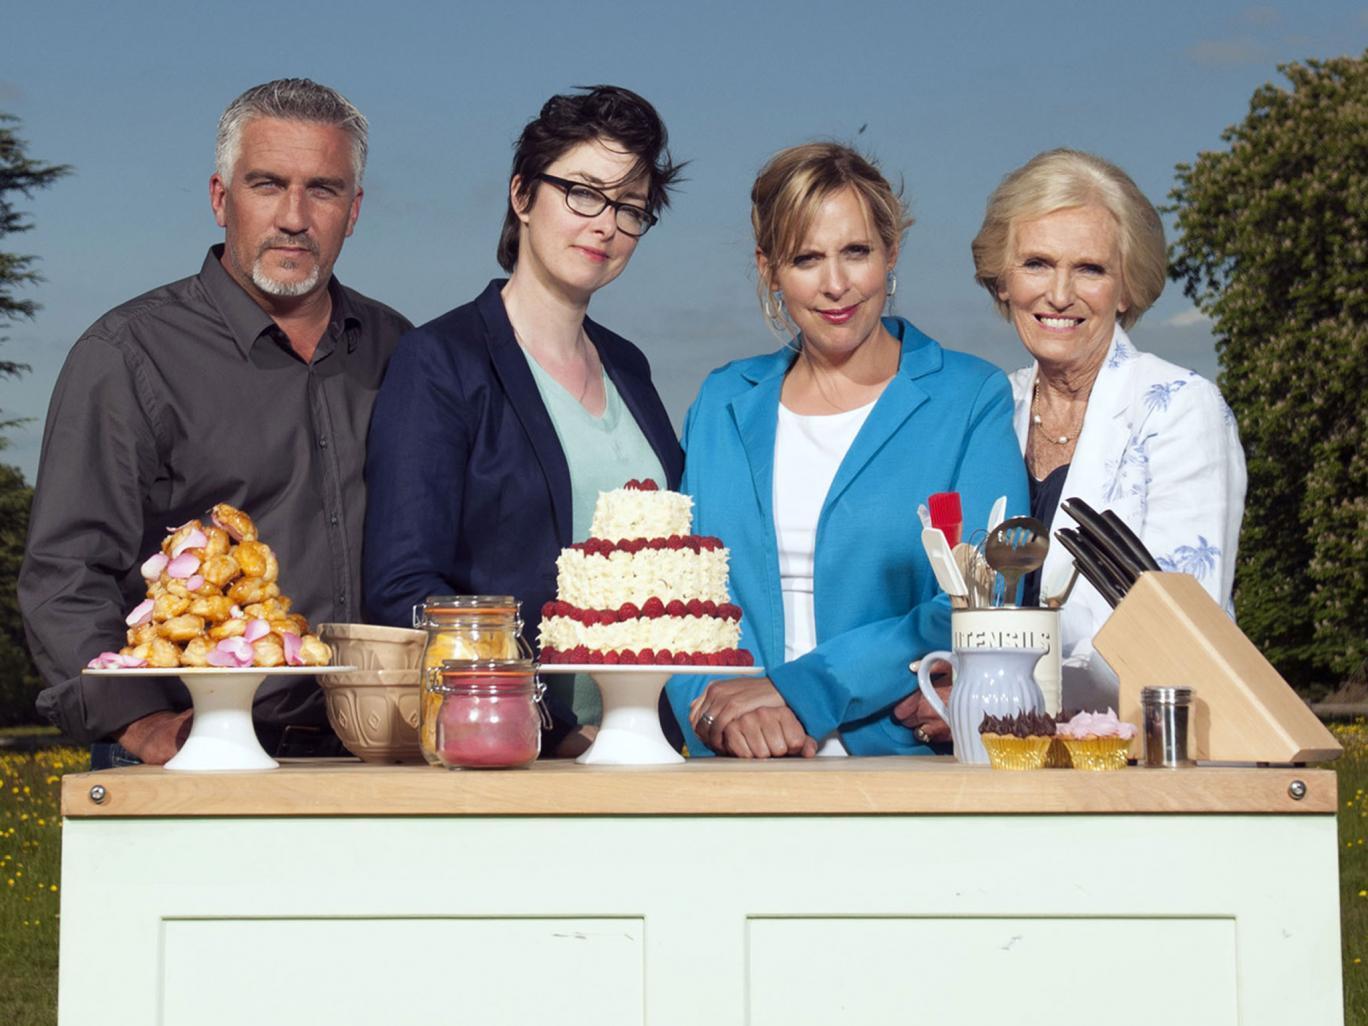 Paul Hollywood, Sue Perkins, Mel Giedroyc and Mary Berry judge and host The Great British Bake Off